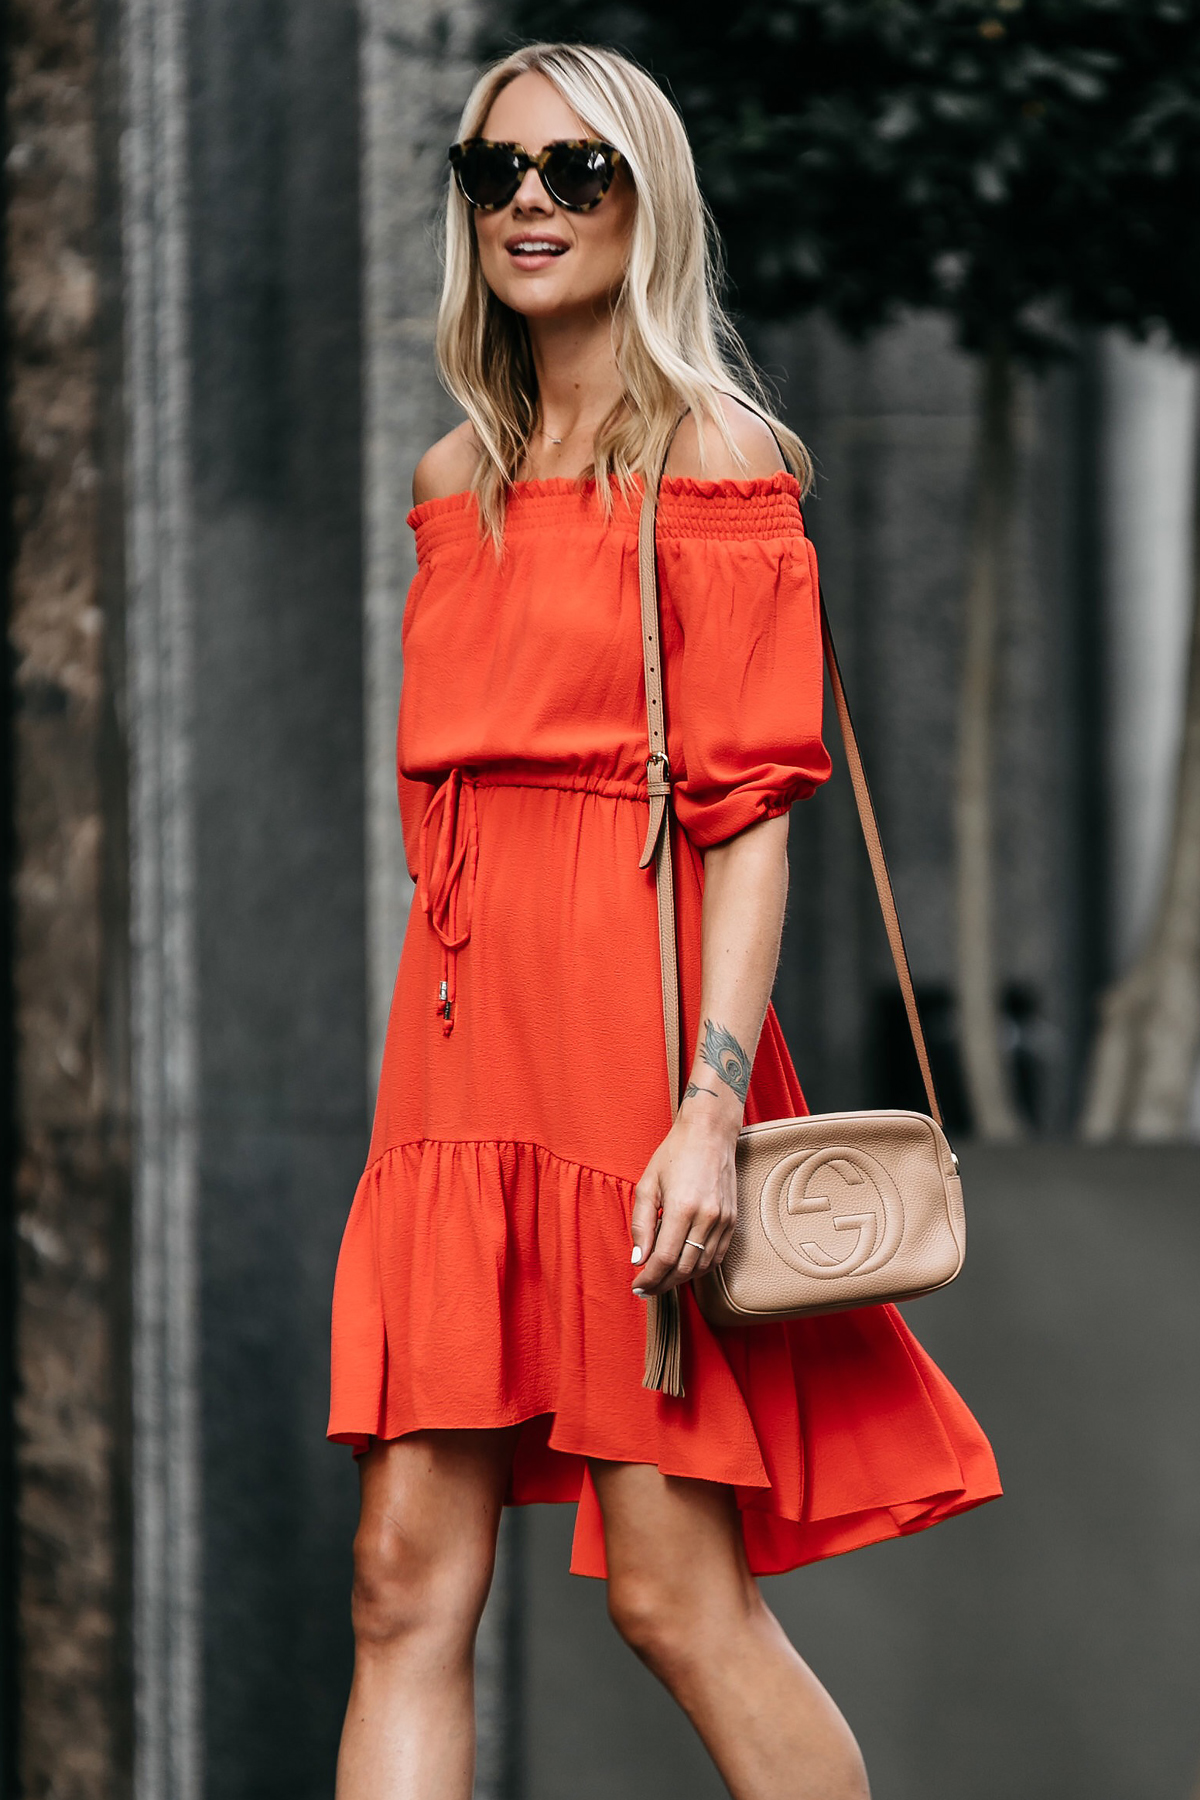 Blonde Woman Wearing Vince Camuto Red off-the-shoulder Dress